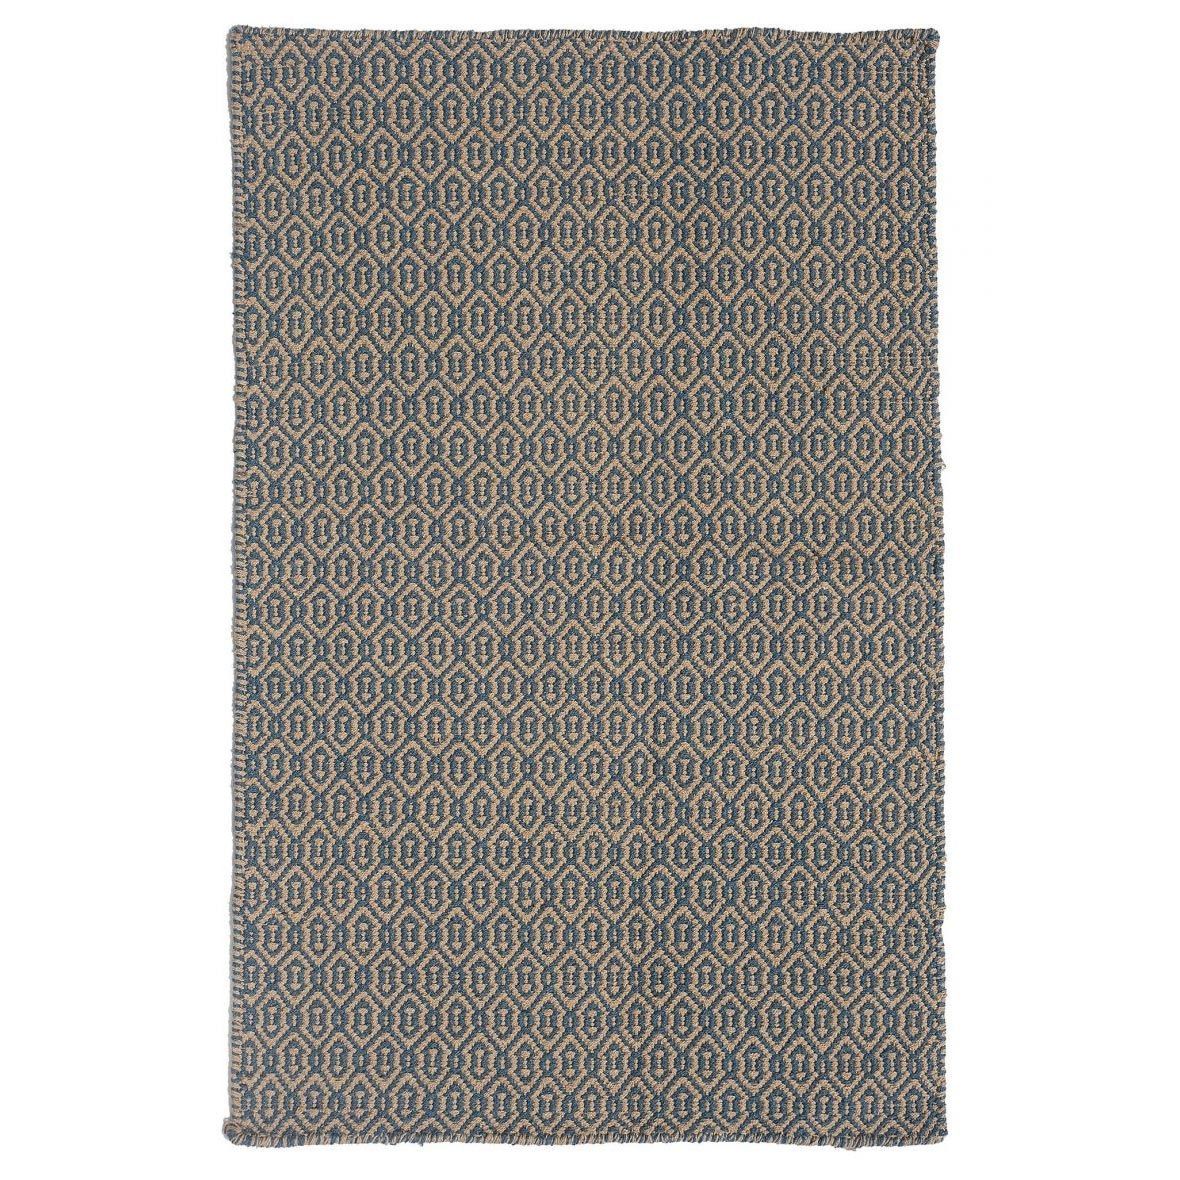 18 Best Washable Rugs To In 2021, Washable Bathroom Rugs Uk